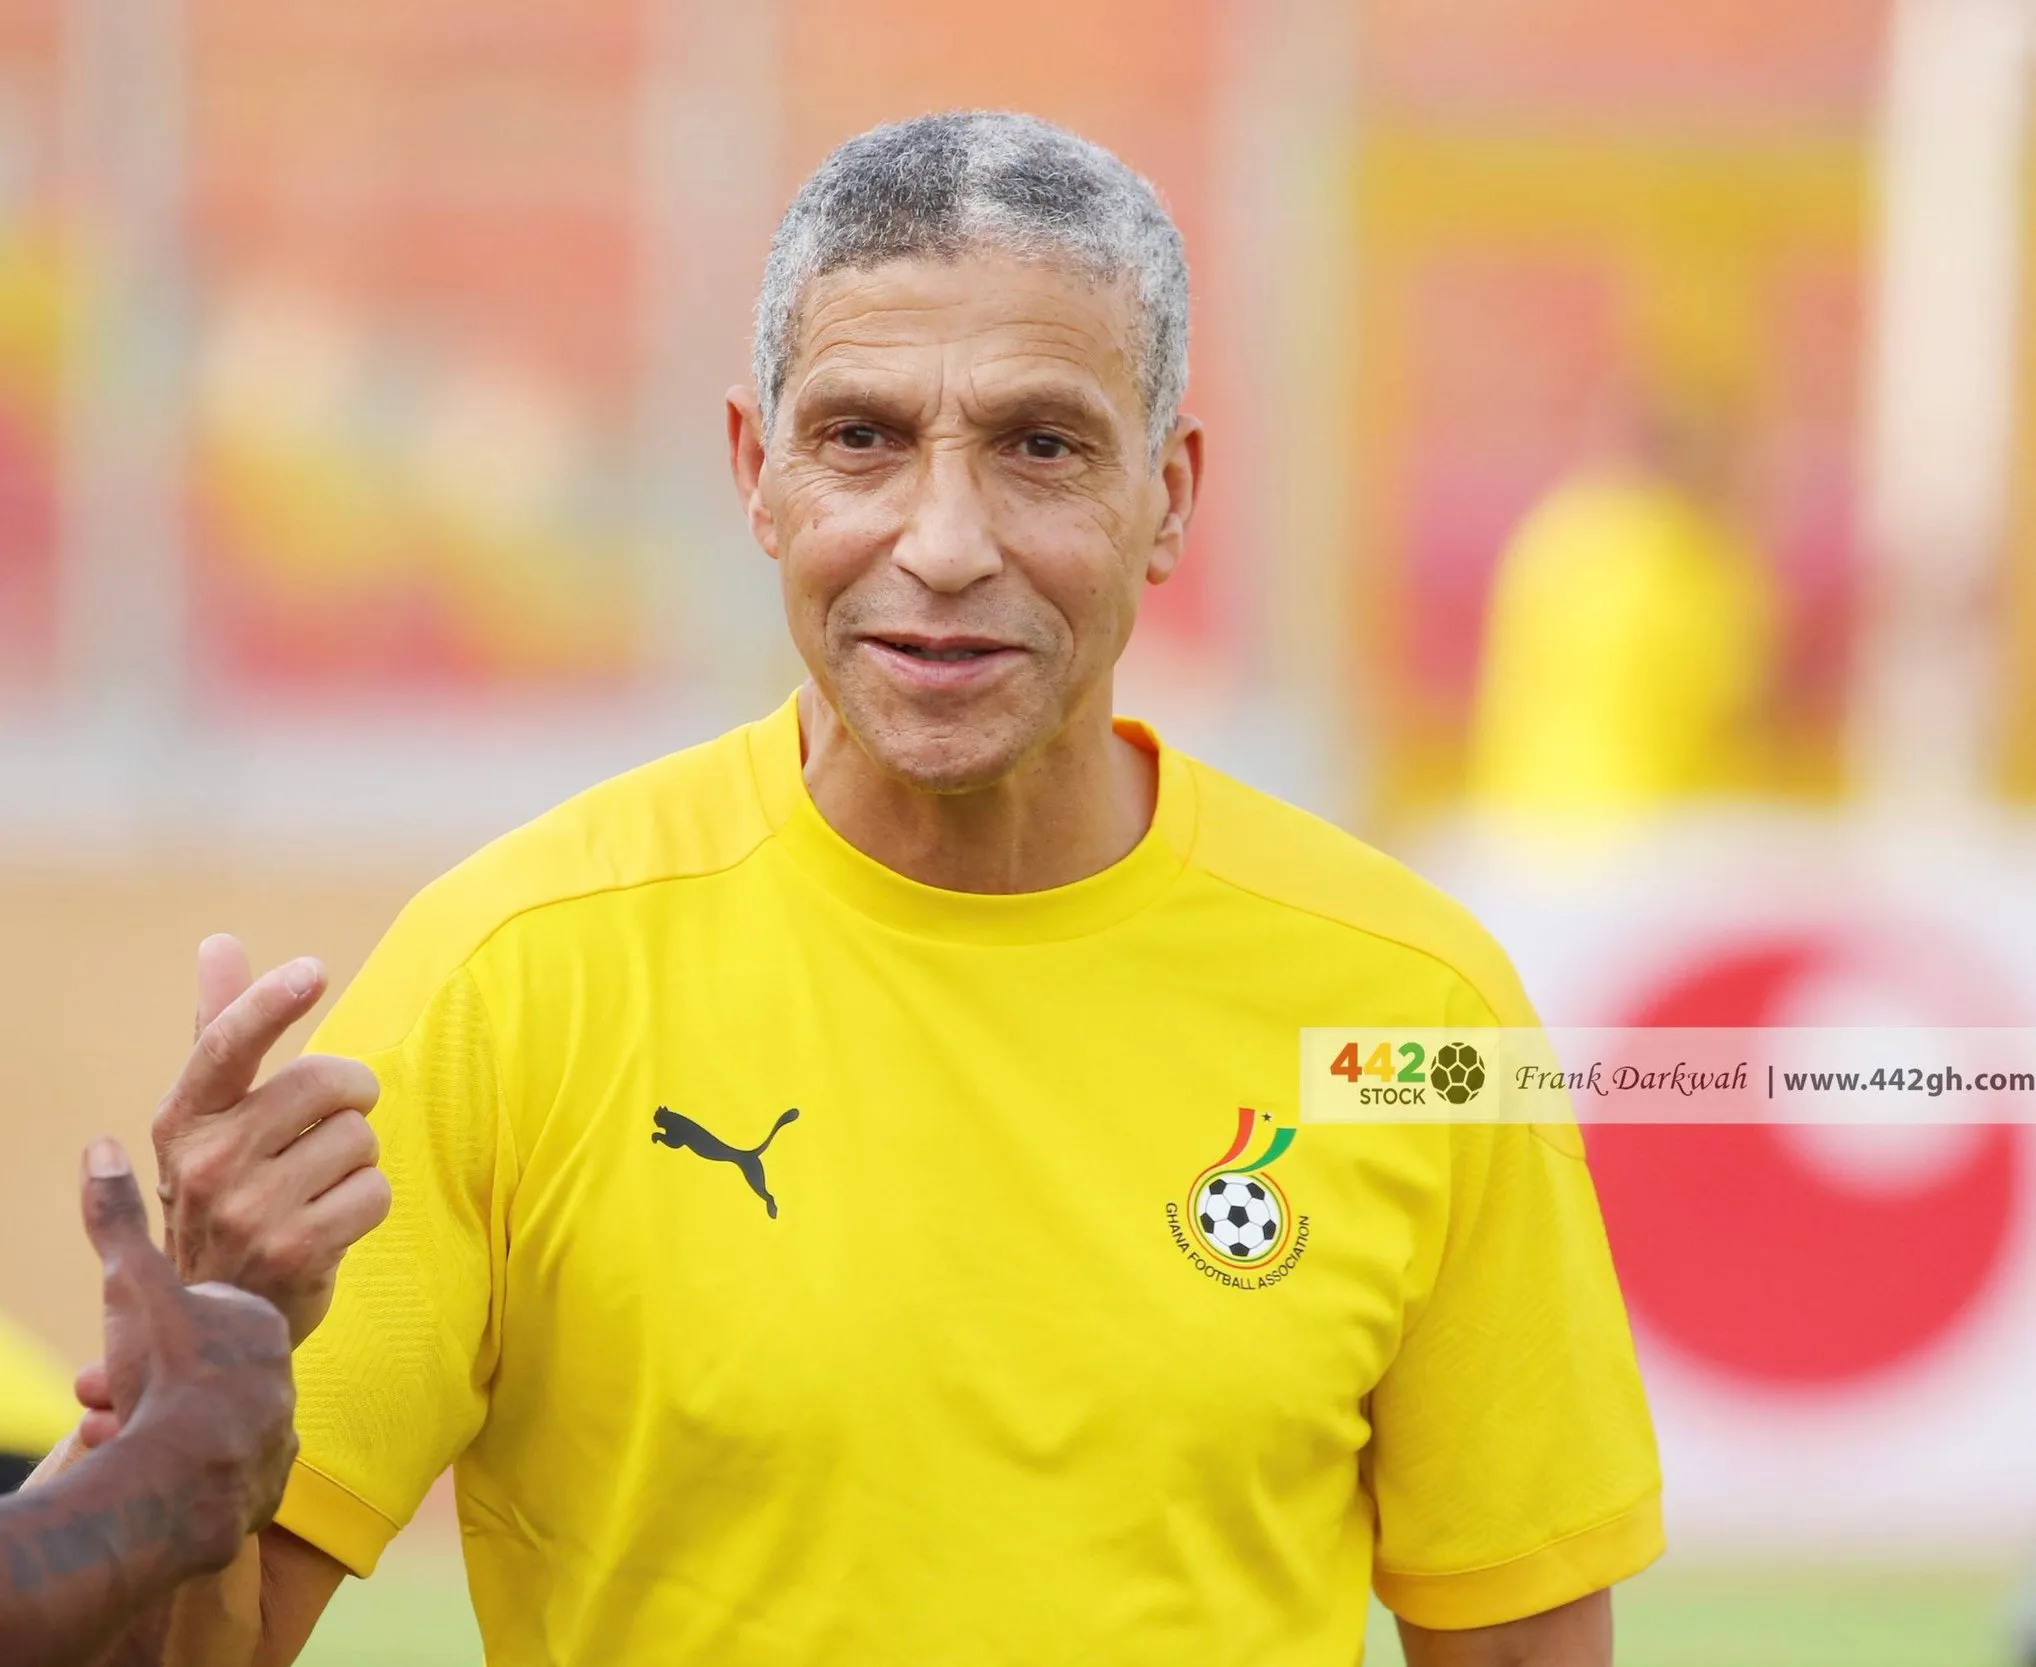 Check out all the 24 coaches and their nationalities for the AFCON 2023